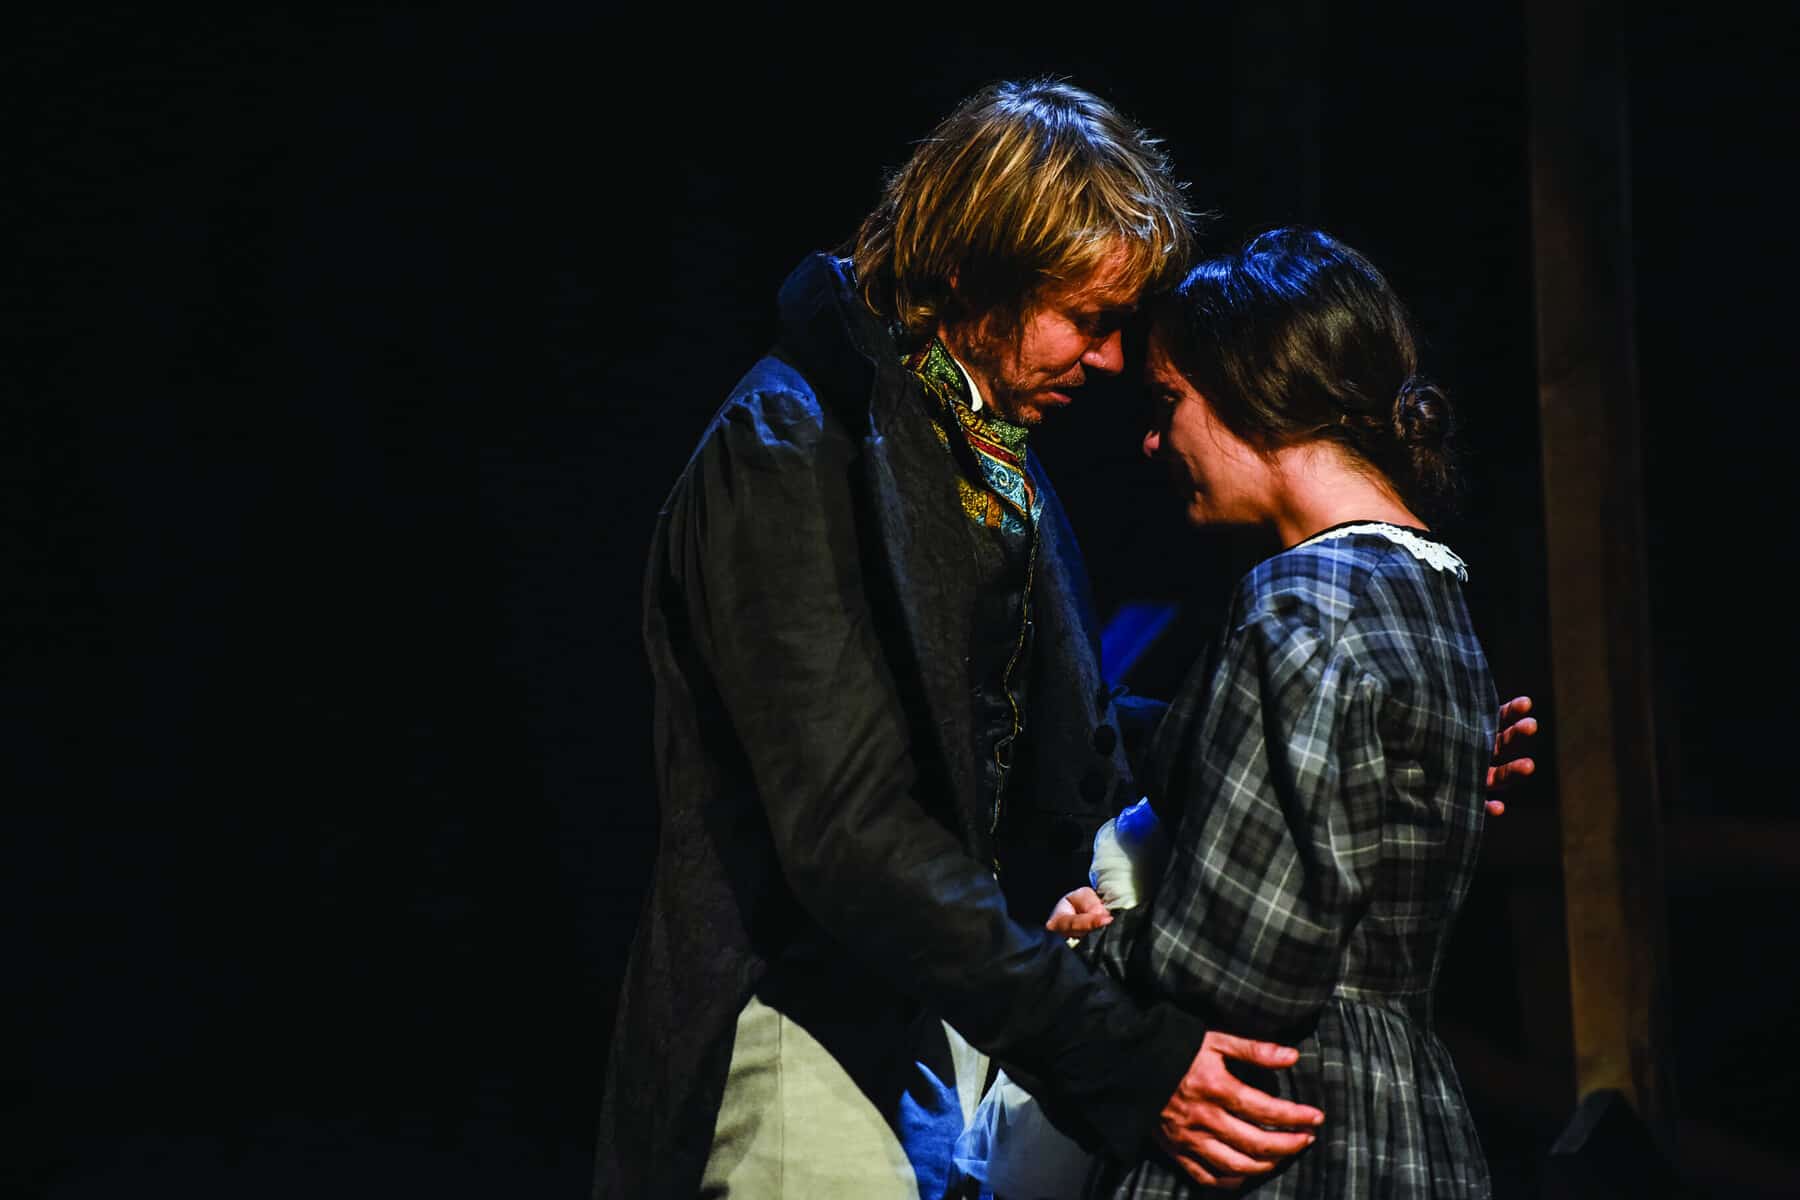 Blackeyed Theatre’s Jane Eyre at Malvern Theatres: Review